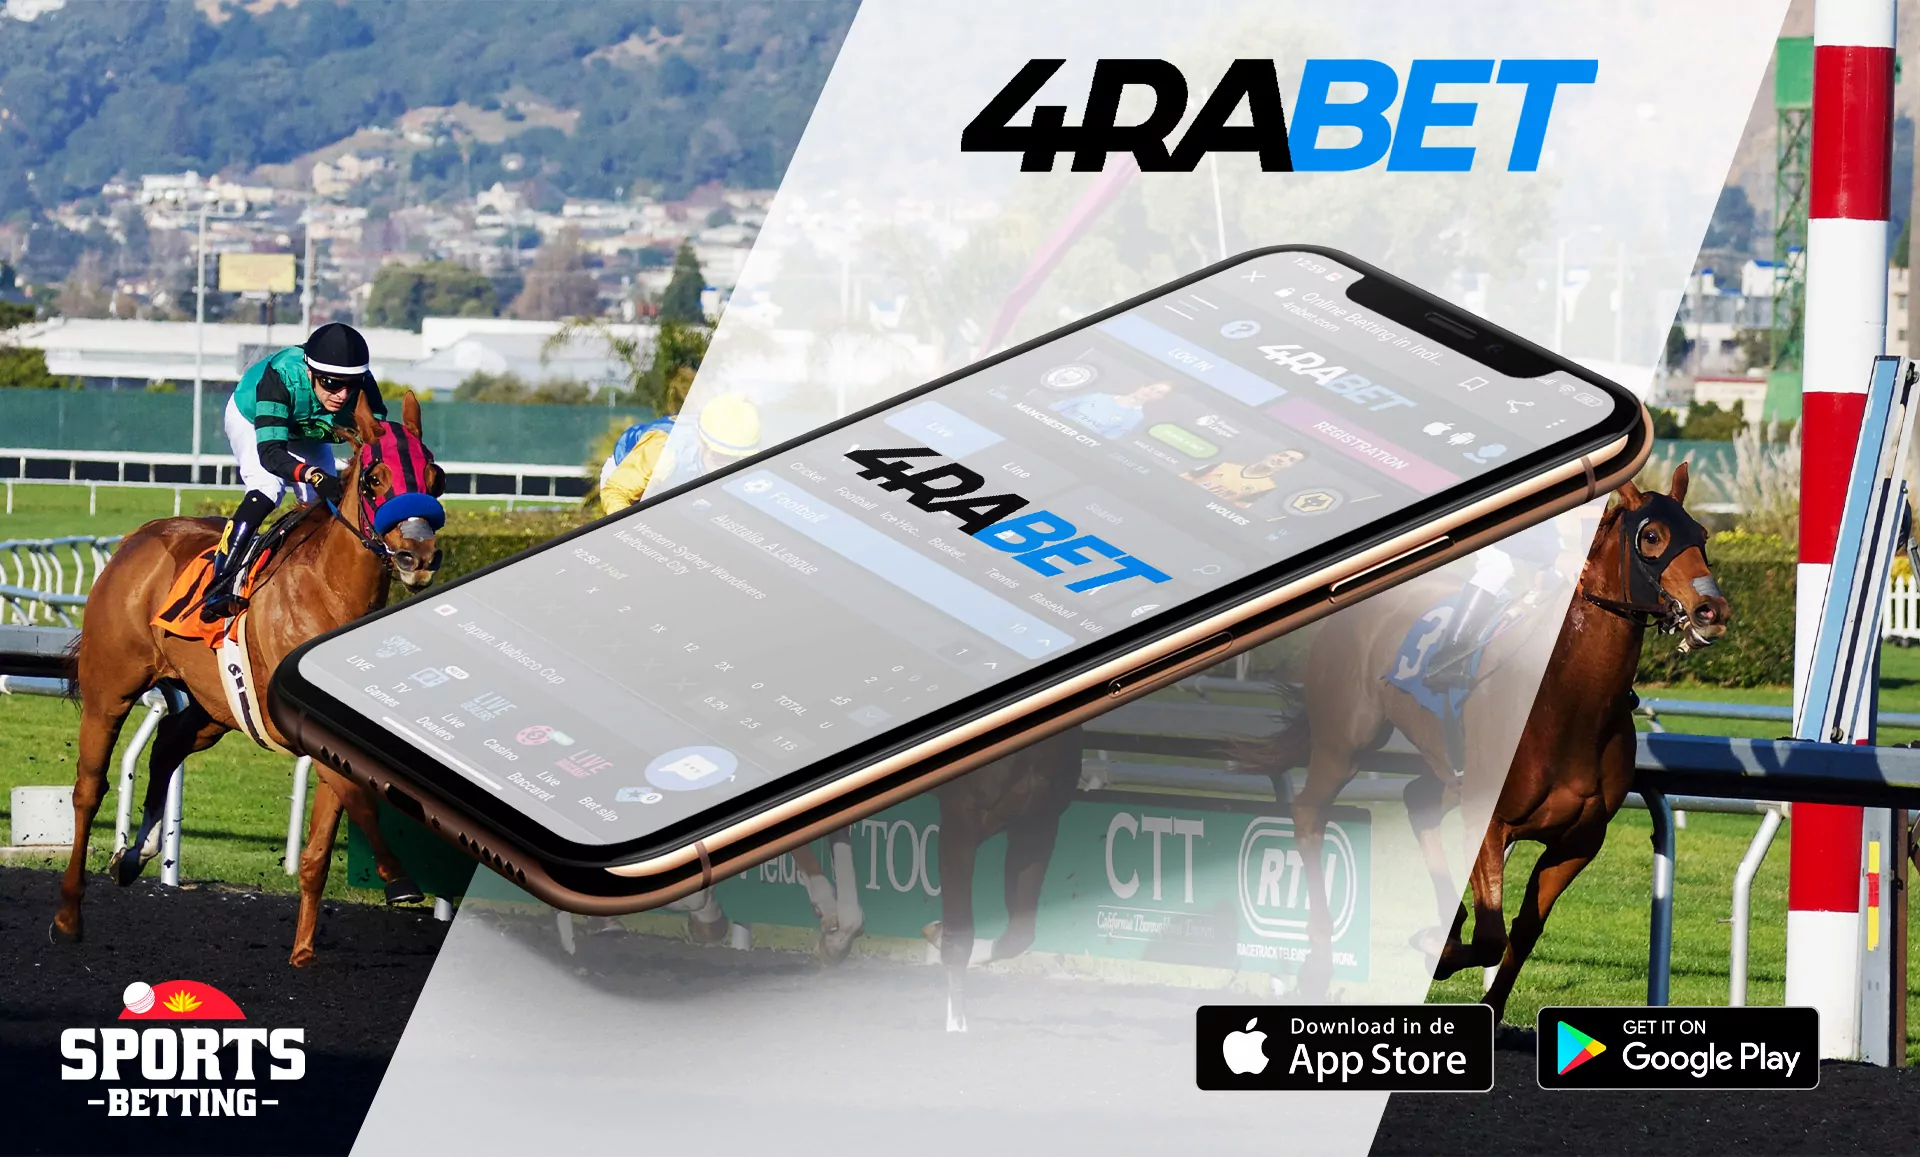 Bet on horse-racing with 4rabet and get 200% welcome bonus up to 20,000 BDT.